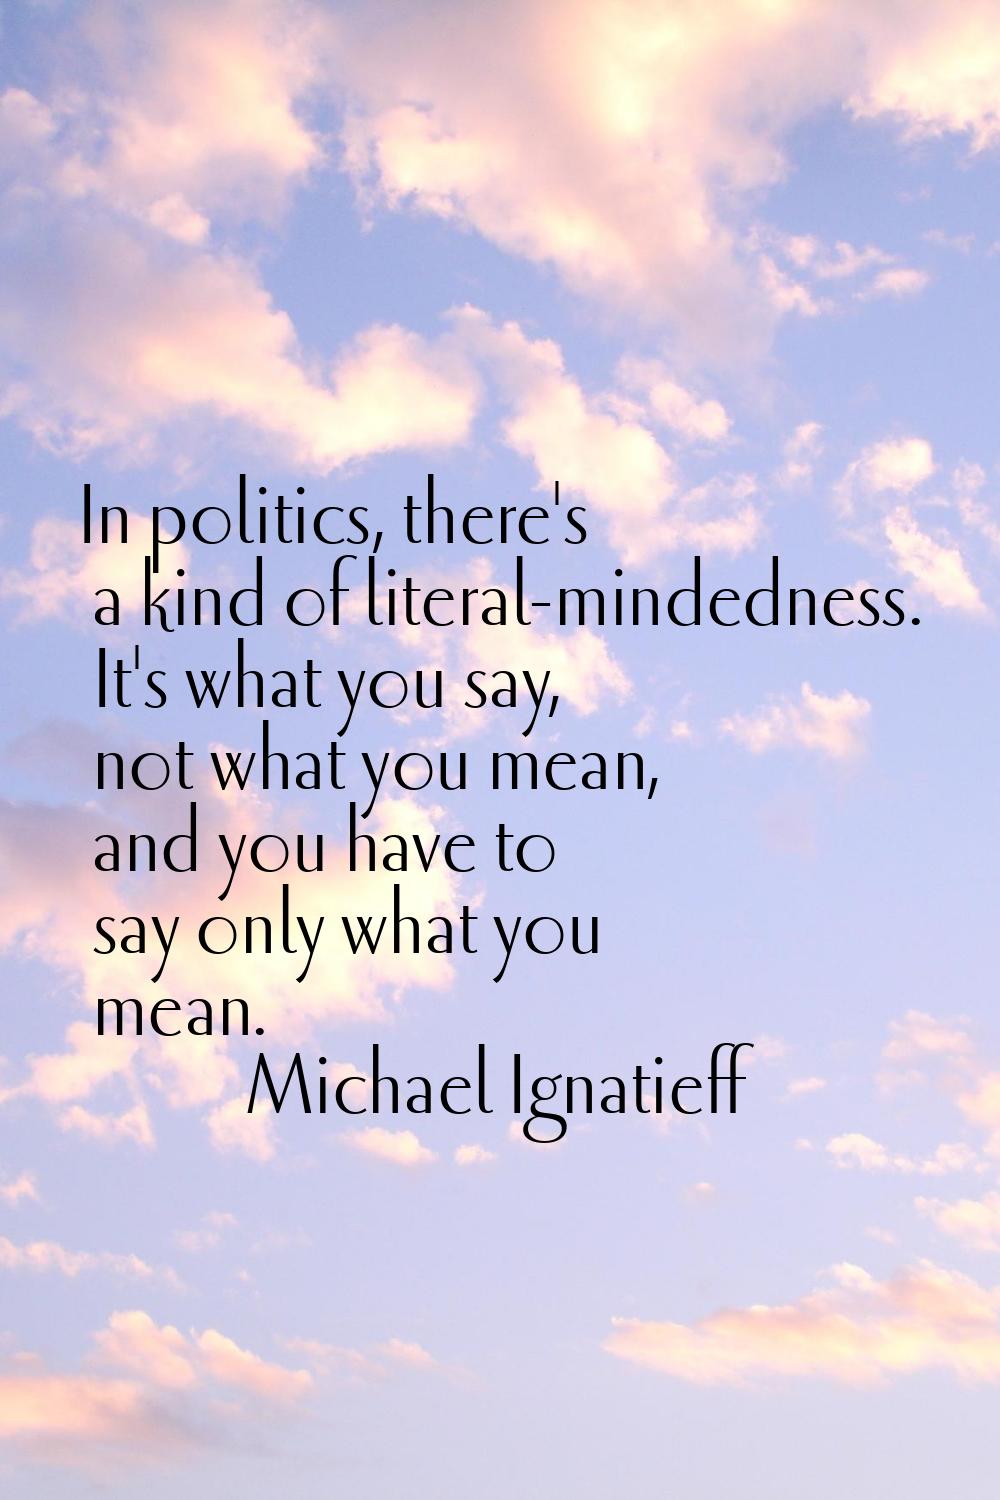 In politics, there's a kind of literal-mindedness. It's what you say, not what you mean, and you ha